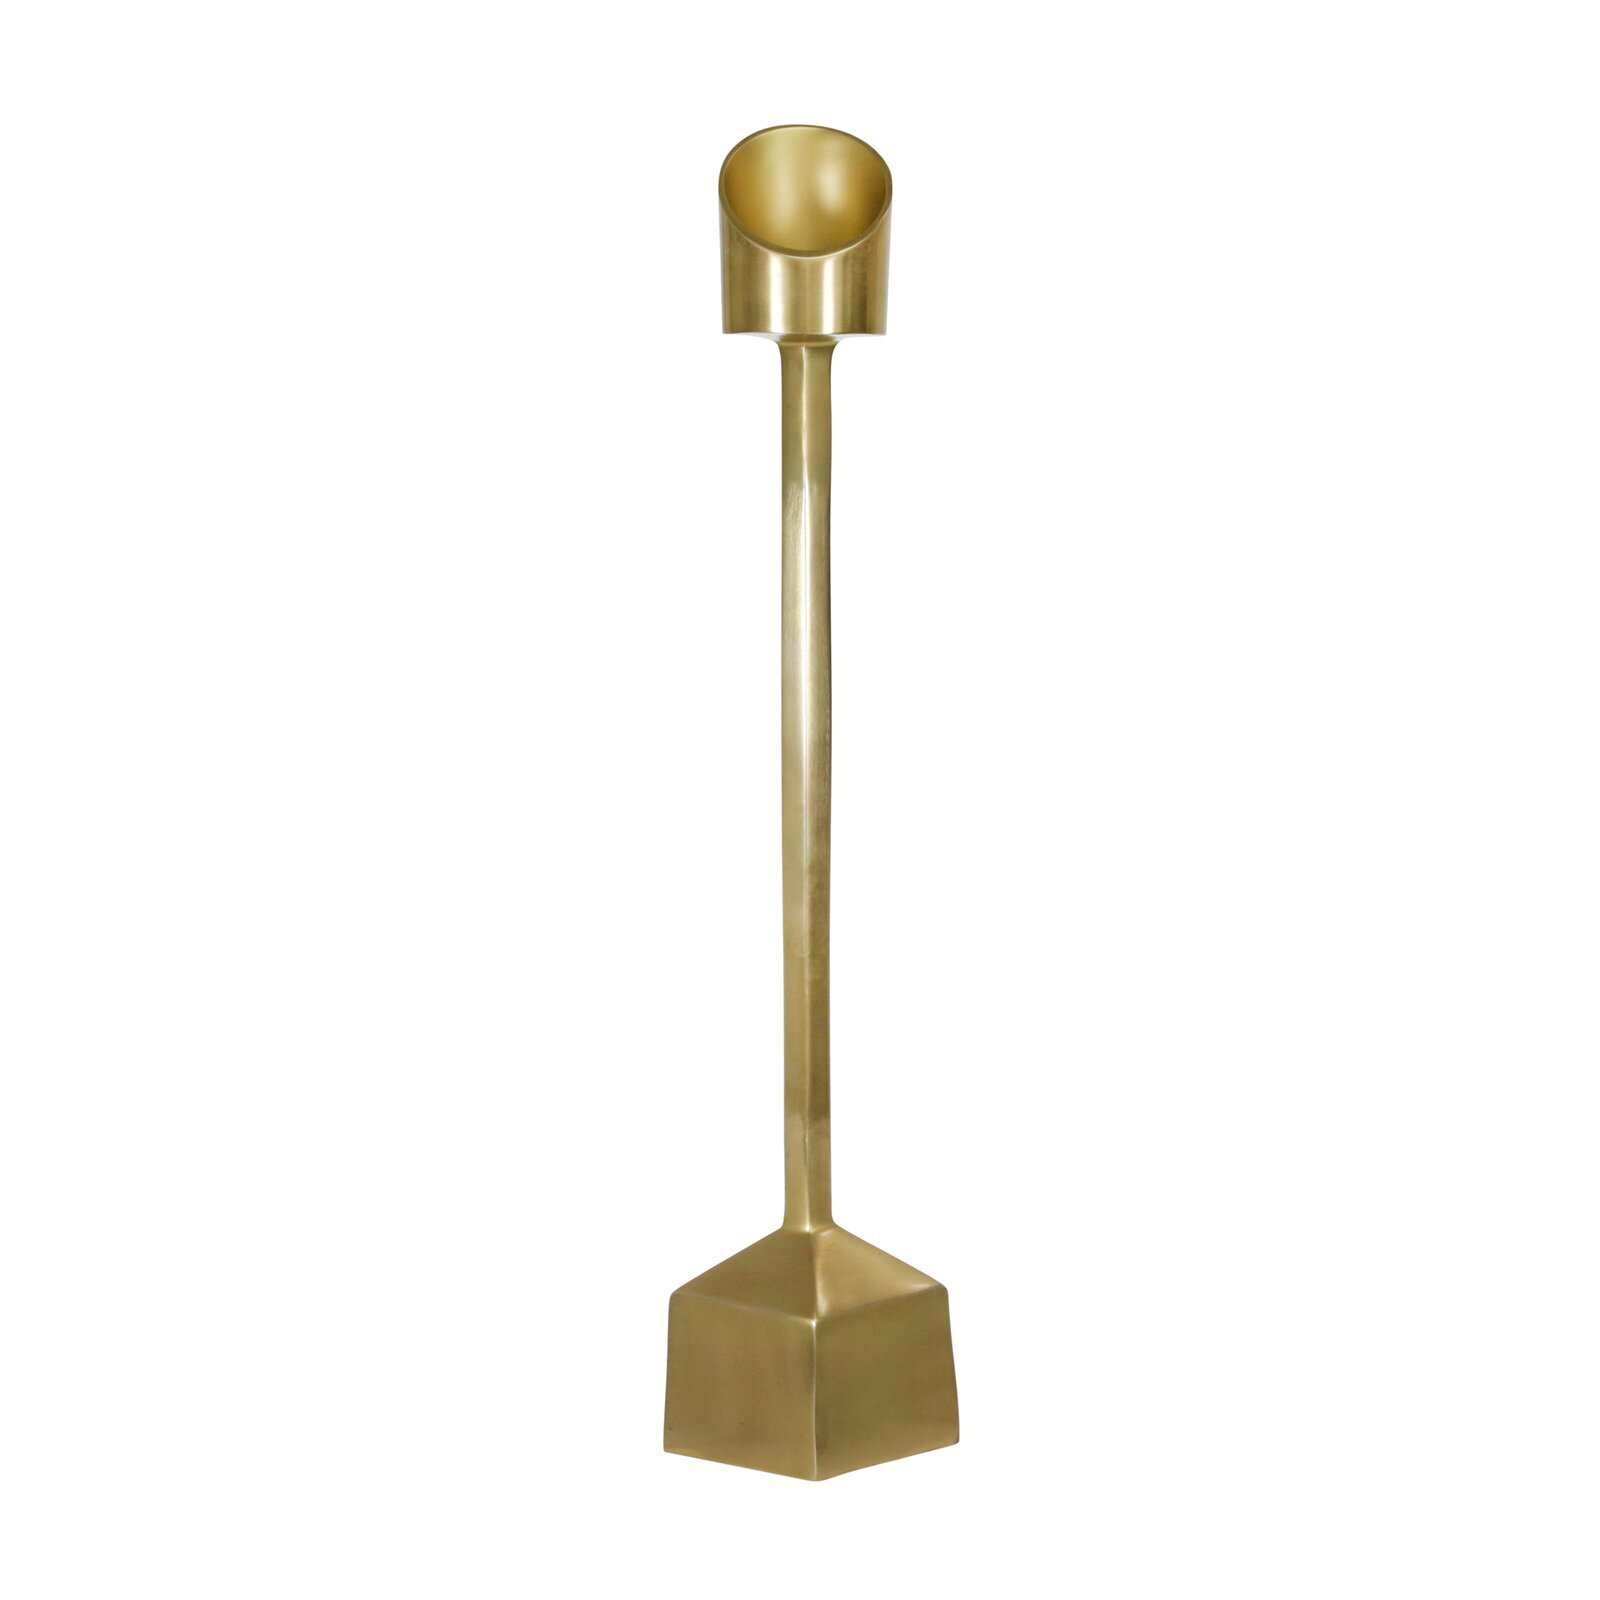 Floor standing candle holder in a golden finish